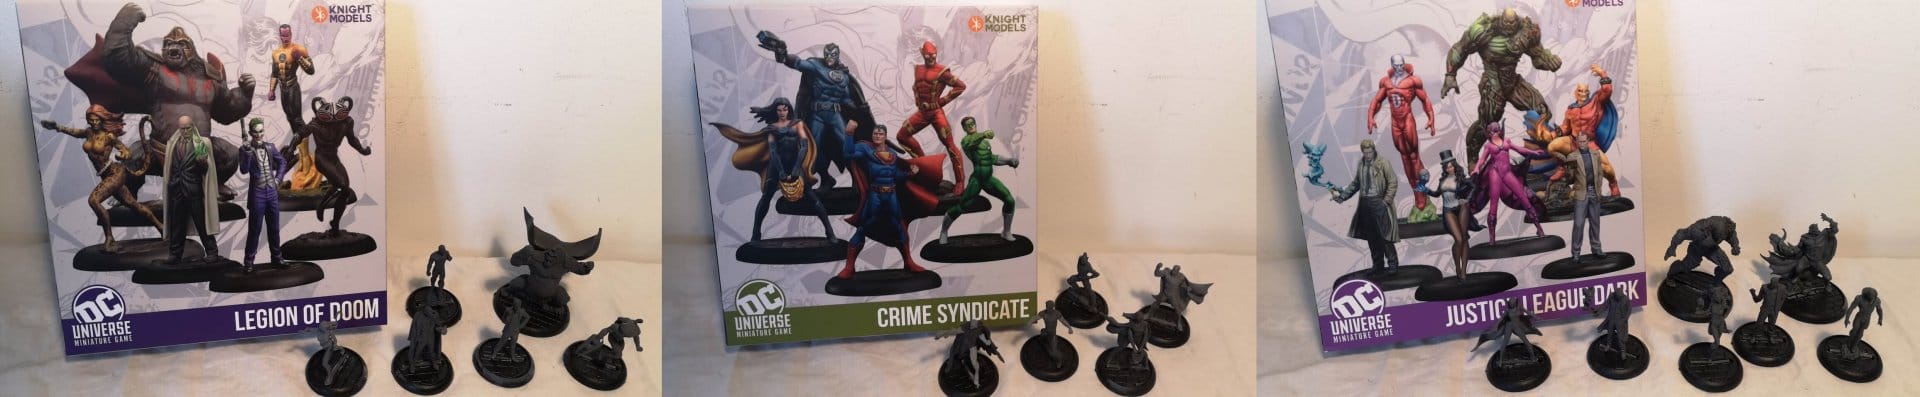 Accessories Objective Game Markers Set 2 Knight Models DC Universe: